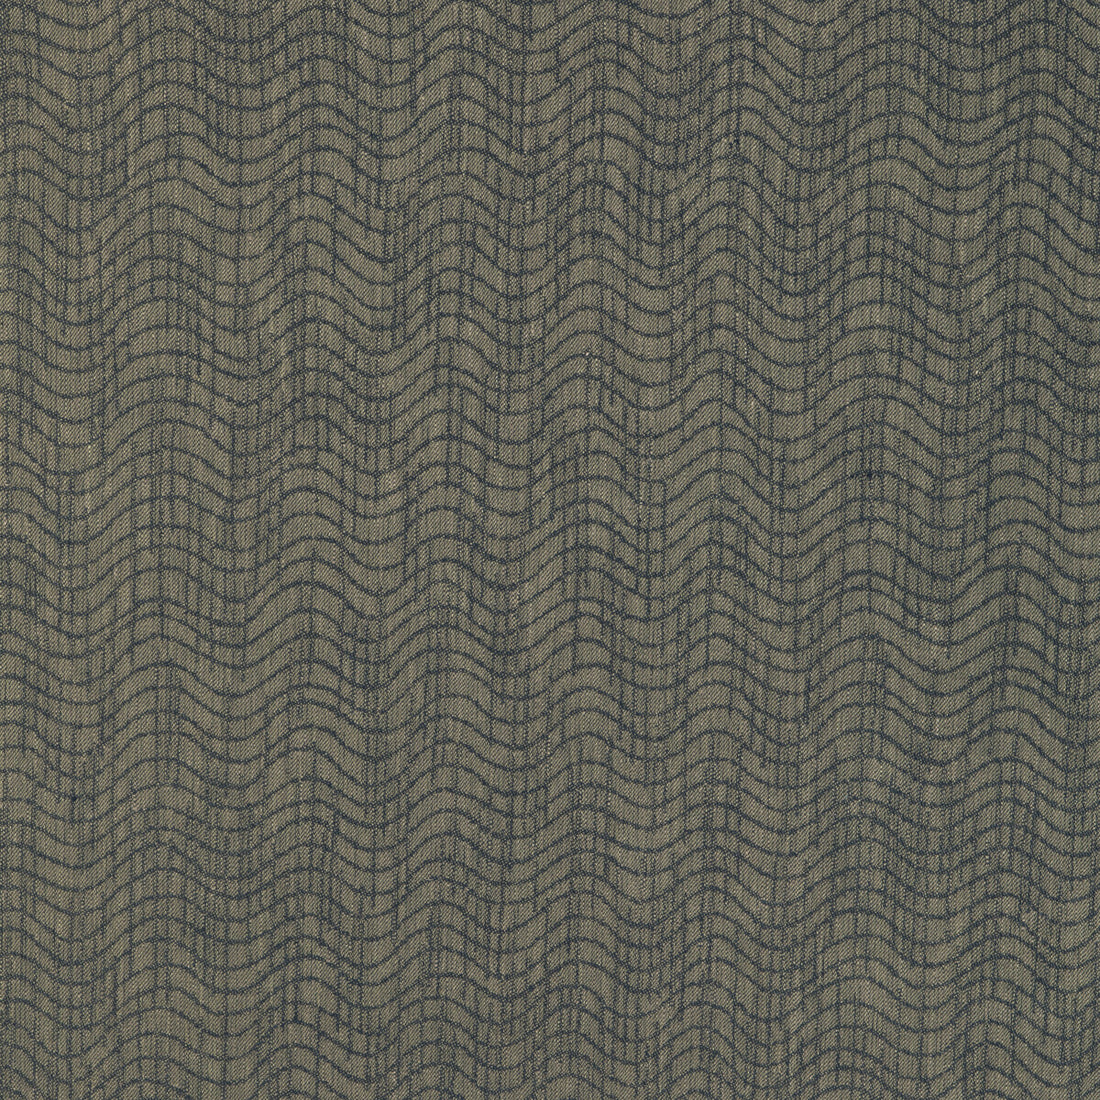 Dadami fabric in soot color - pattern GWF-3801.21.0 - by Lee Jofa Modern in the Kelly Wearstler VIII collection